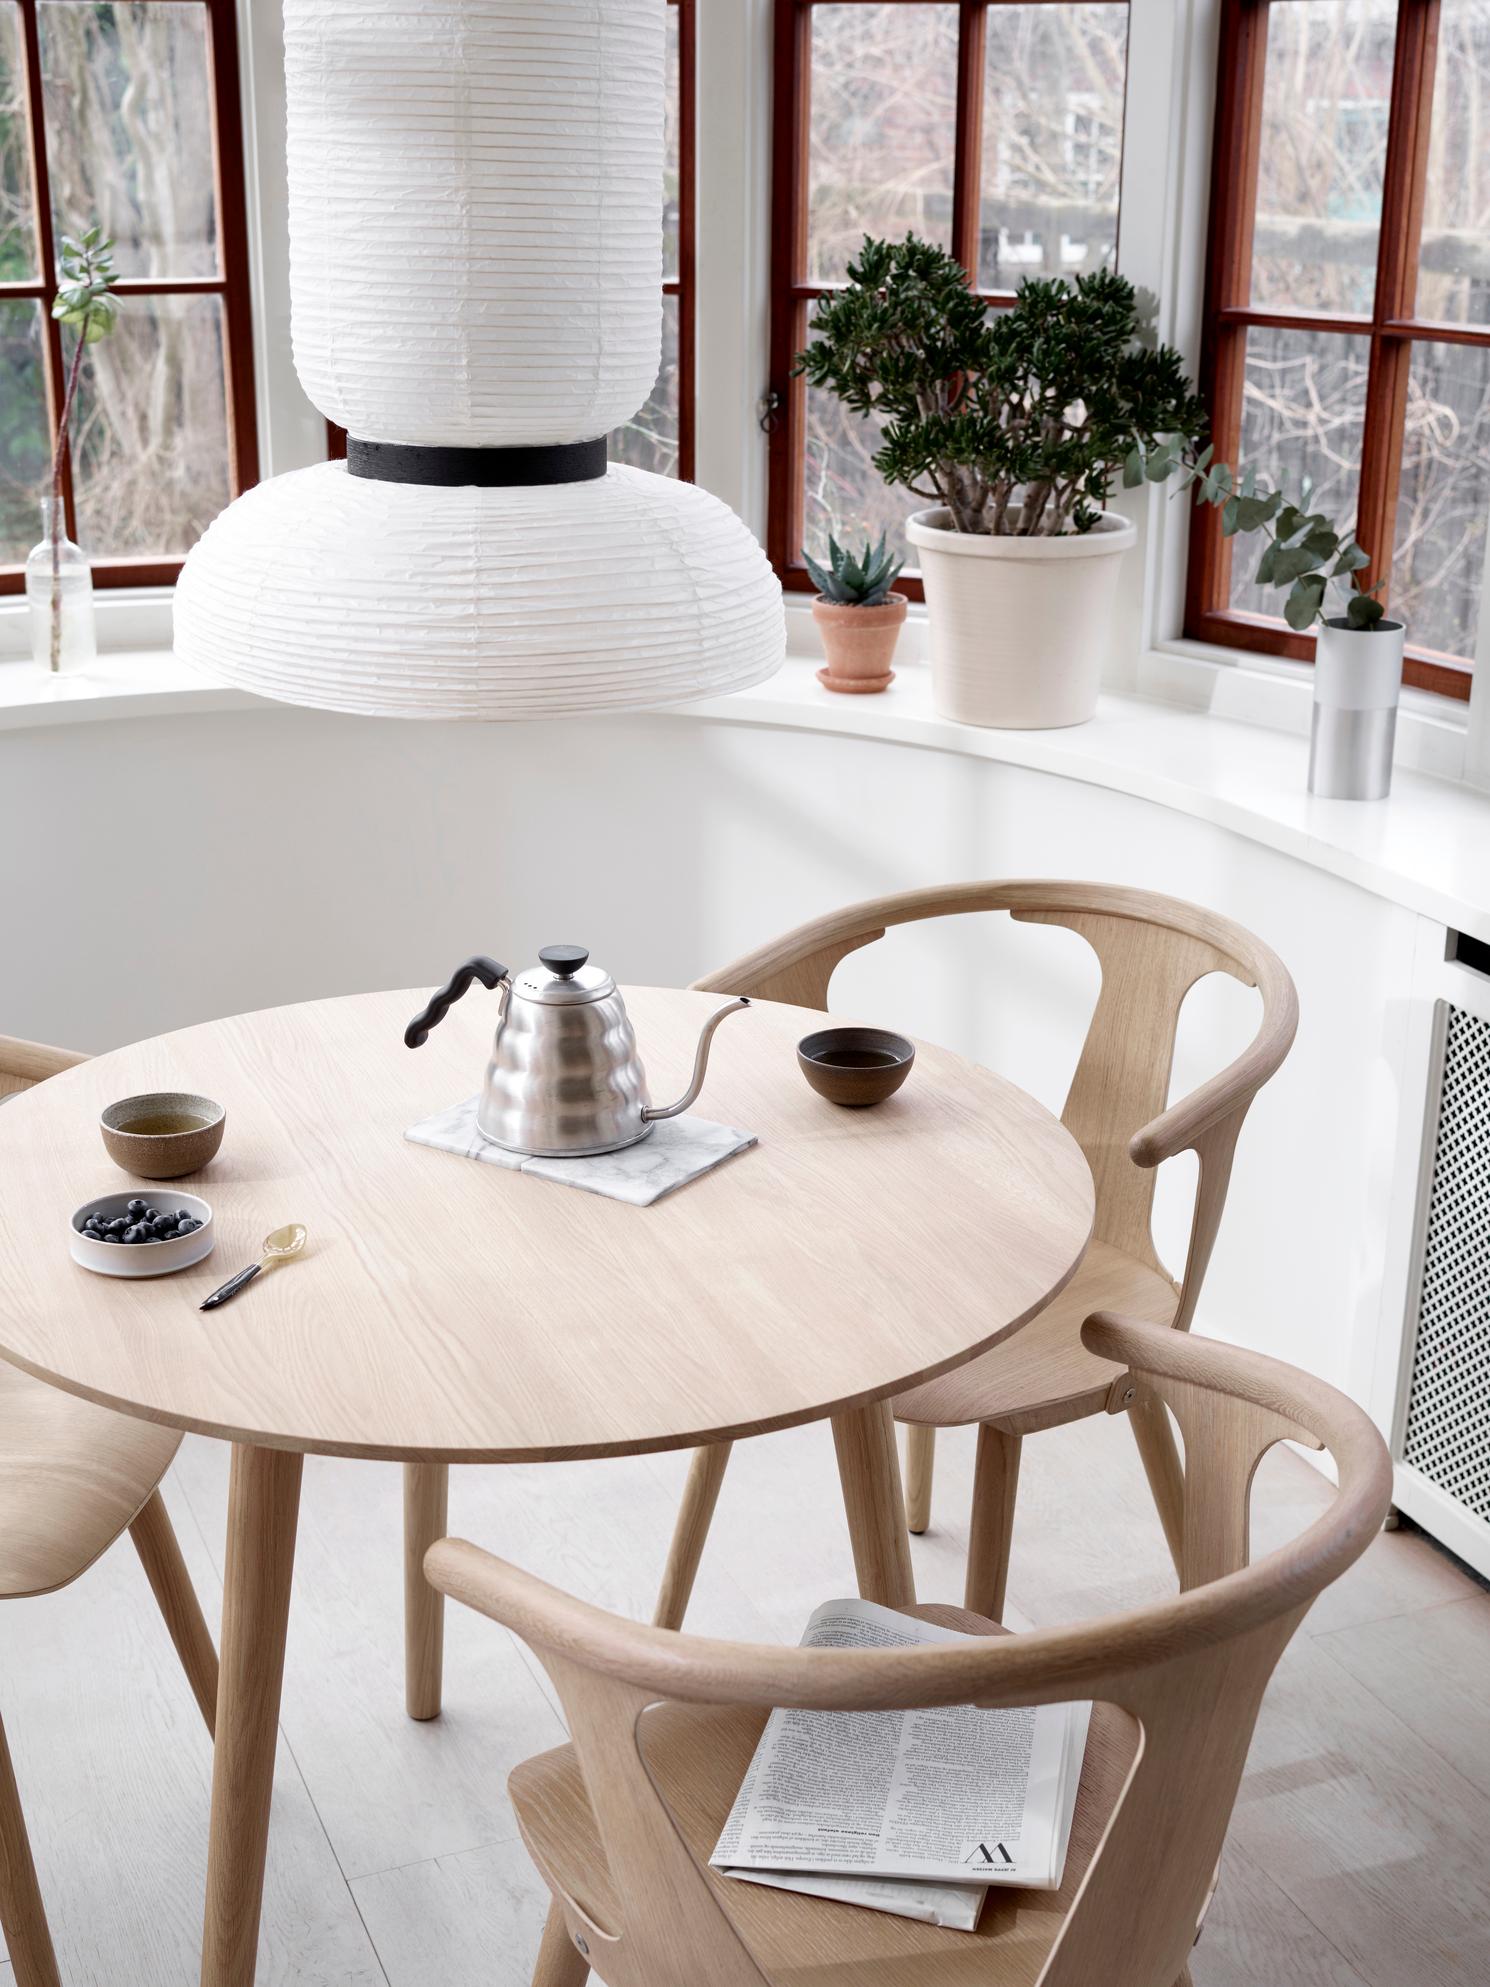 Inspired by the Scandinavian heritage of design and furniture craftmanship, In Between is a result of Sami Kallio’s solid grounding in traditional wood- working techniques and his eye for ingenious detail.
It started with a single chair which later